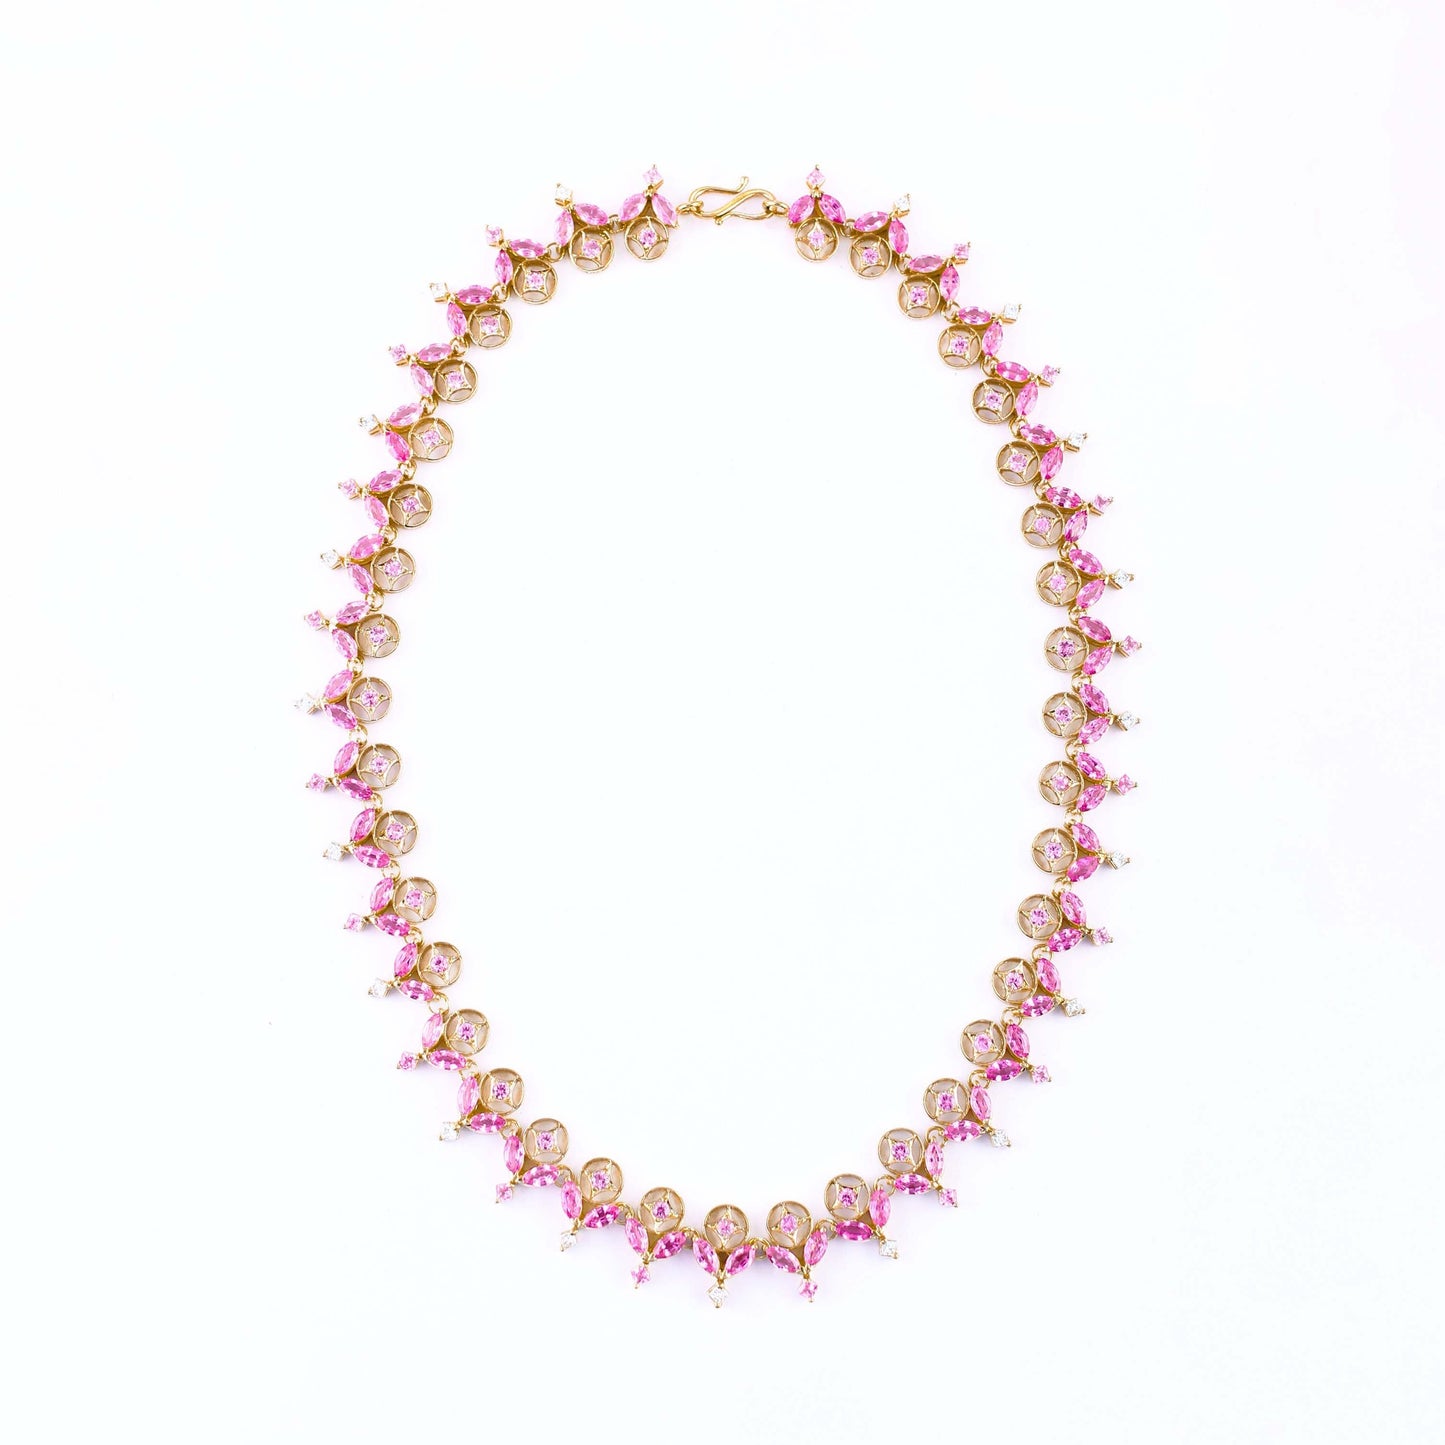 The Tapsee Gold, Pink Sapphire and Diamond Necklace by Rasvihar